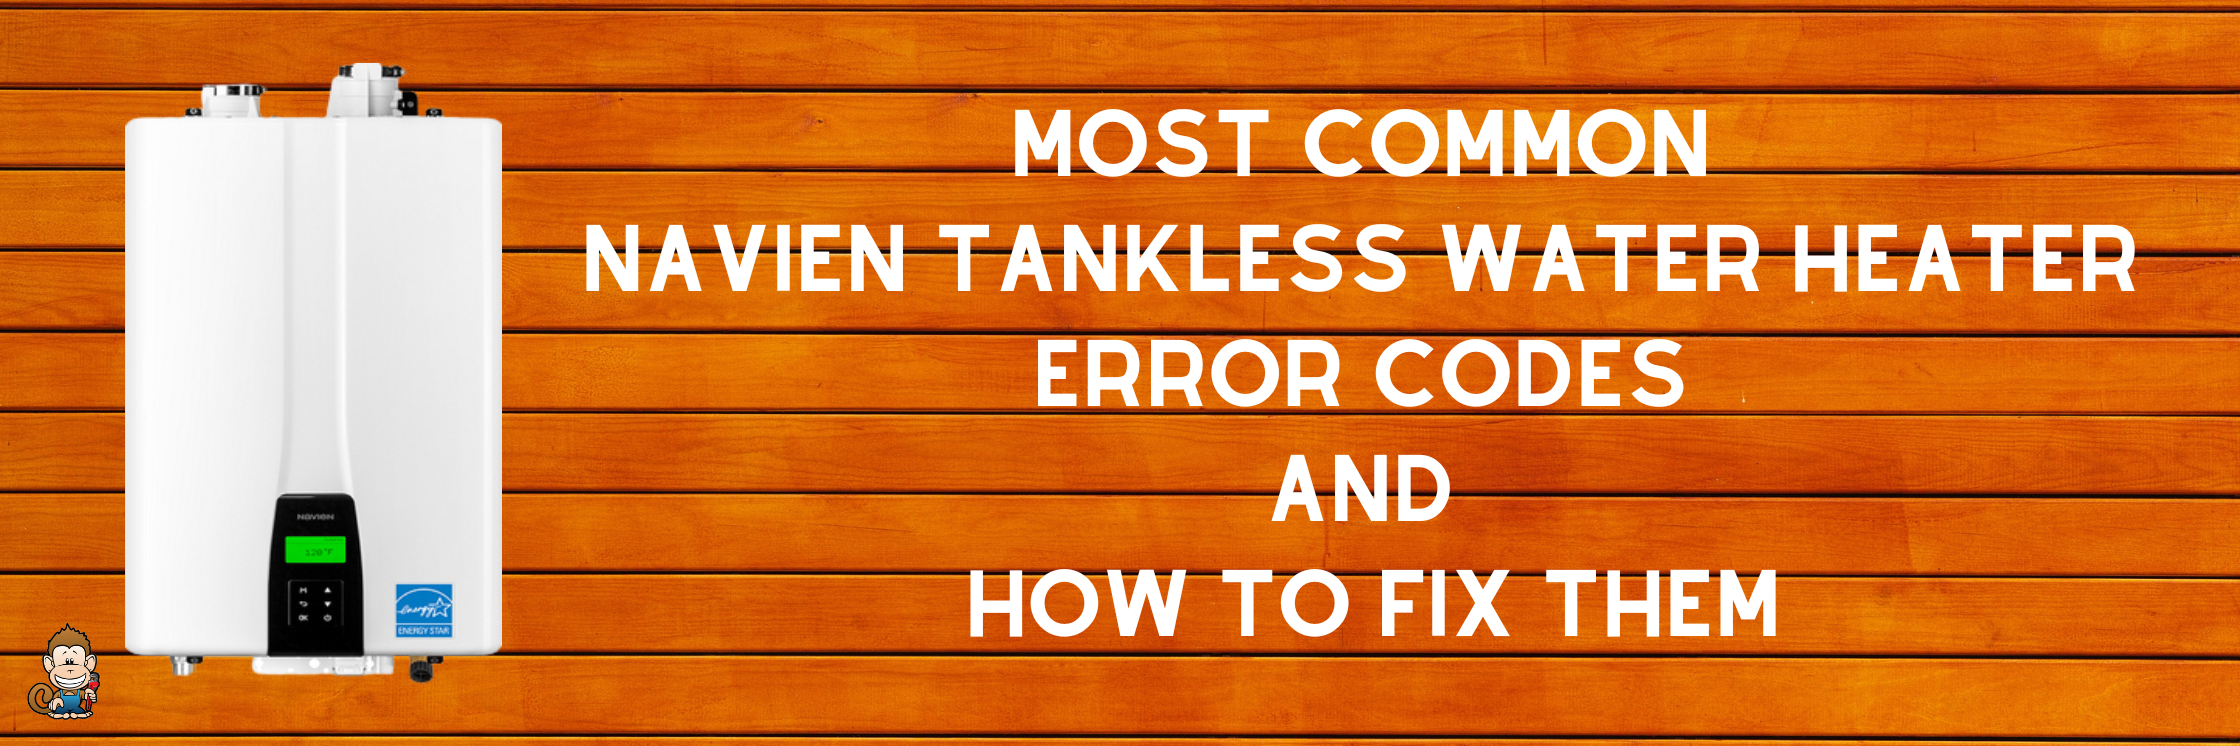 Most Common Navien Tankless Water Heater Error Codes and How to Fix Them